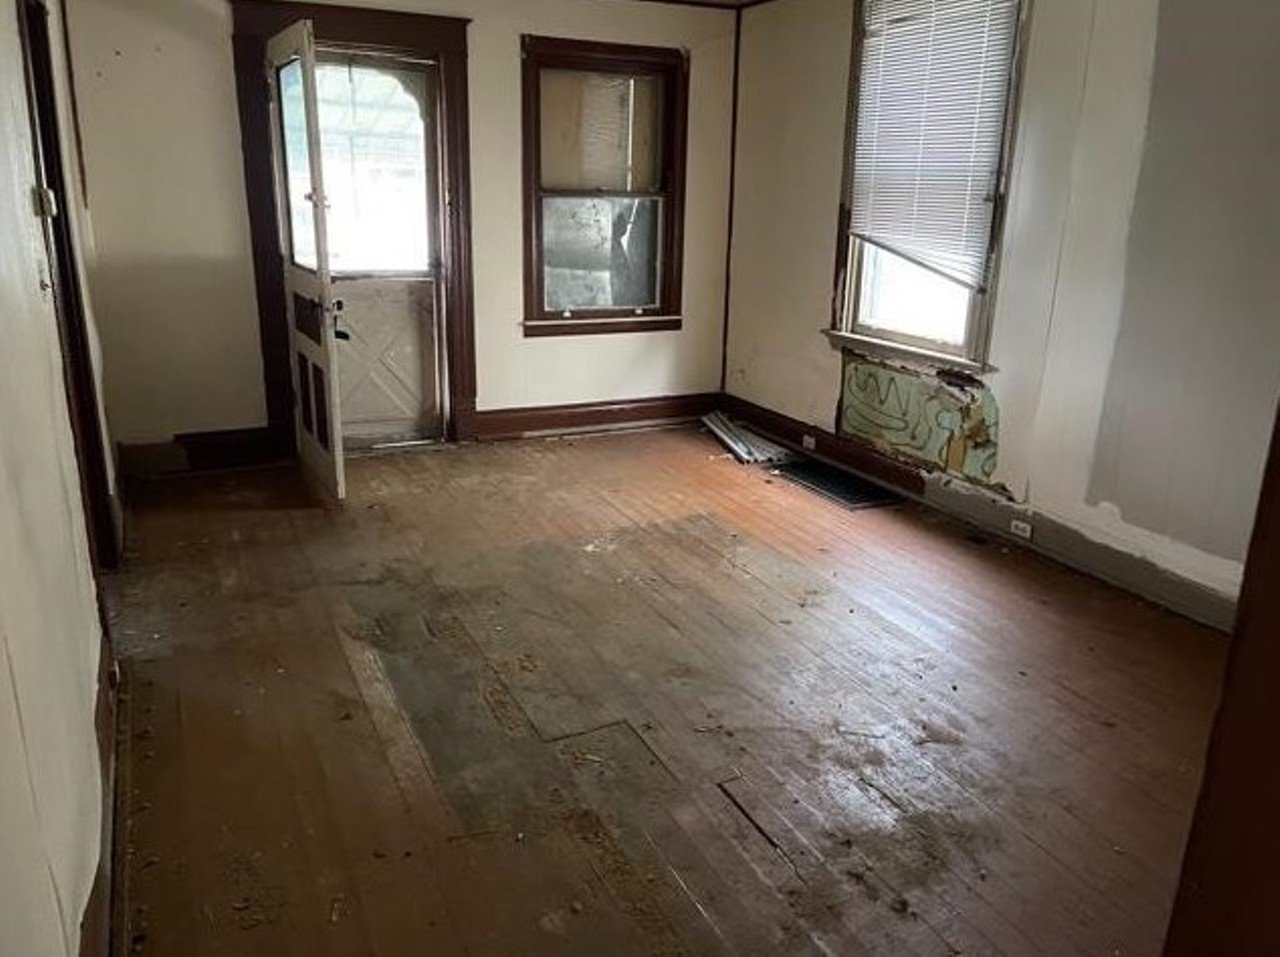 ​​213 Montclair, Ludlow 
This Ludlow home is in need of a full rehab. This two-bedroom, one-bath home is being sold for $64,900. For more information reach out to listing agents Matthew E Perkins and Melissa Housley from Paragon Realty Partners.